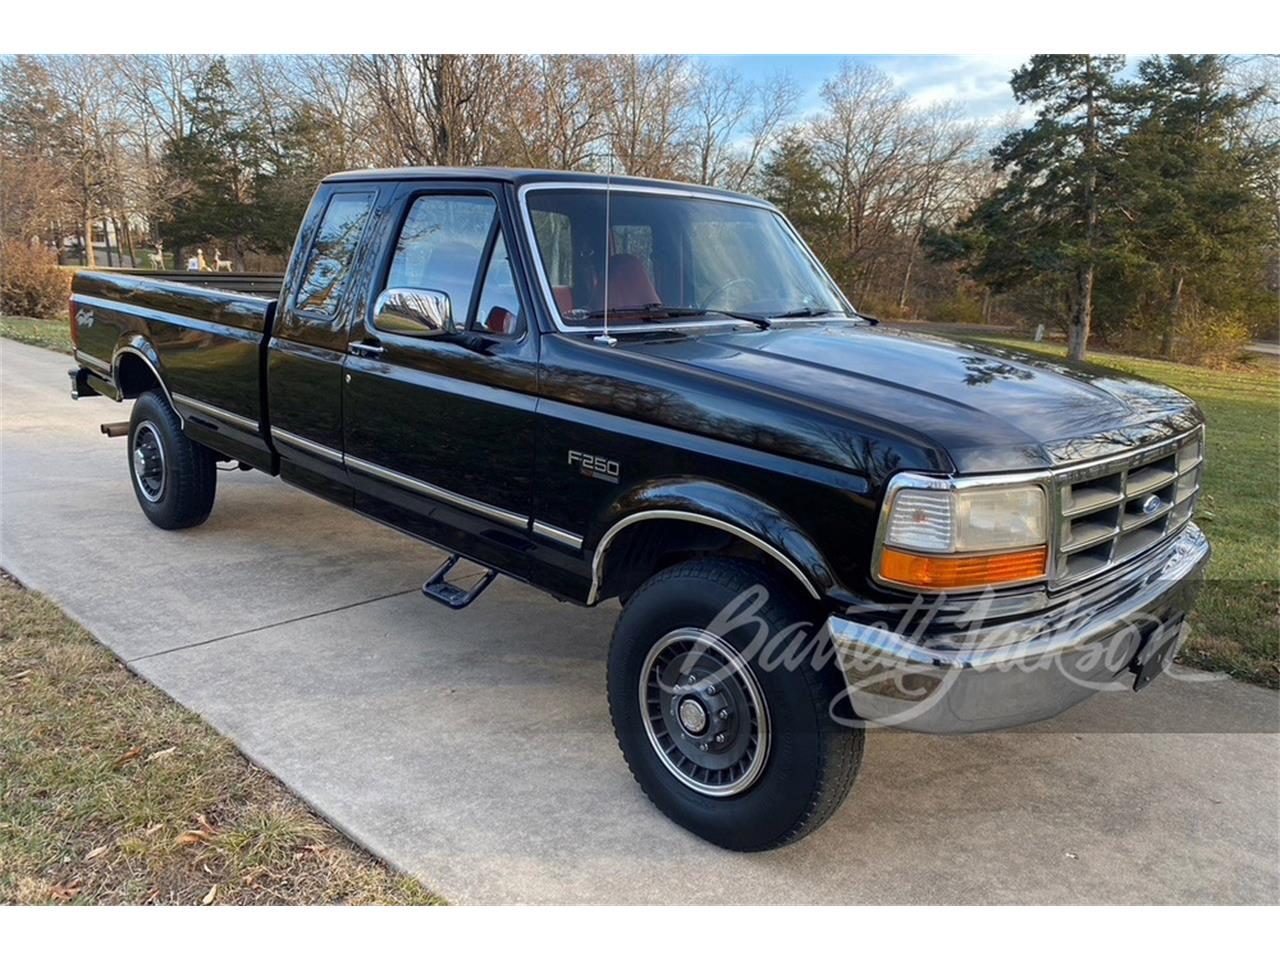 For Sale at Auction: 1994 Ford F250 in Scottsdale, Arizona for sale in Scottsdale, AZ